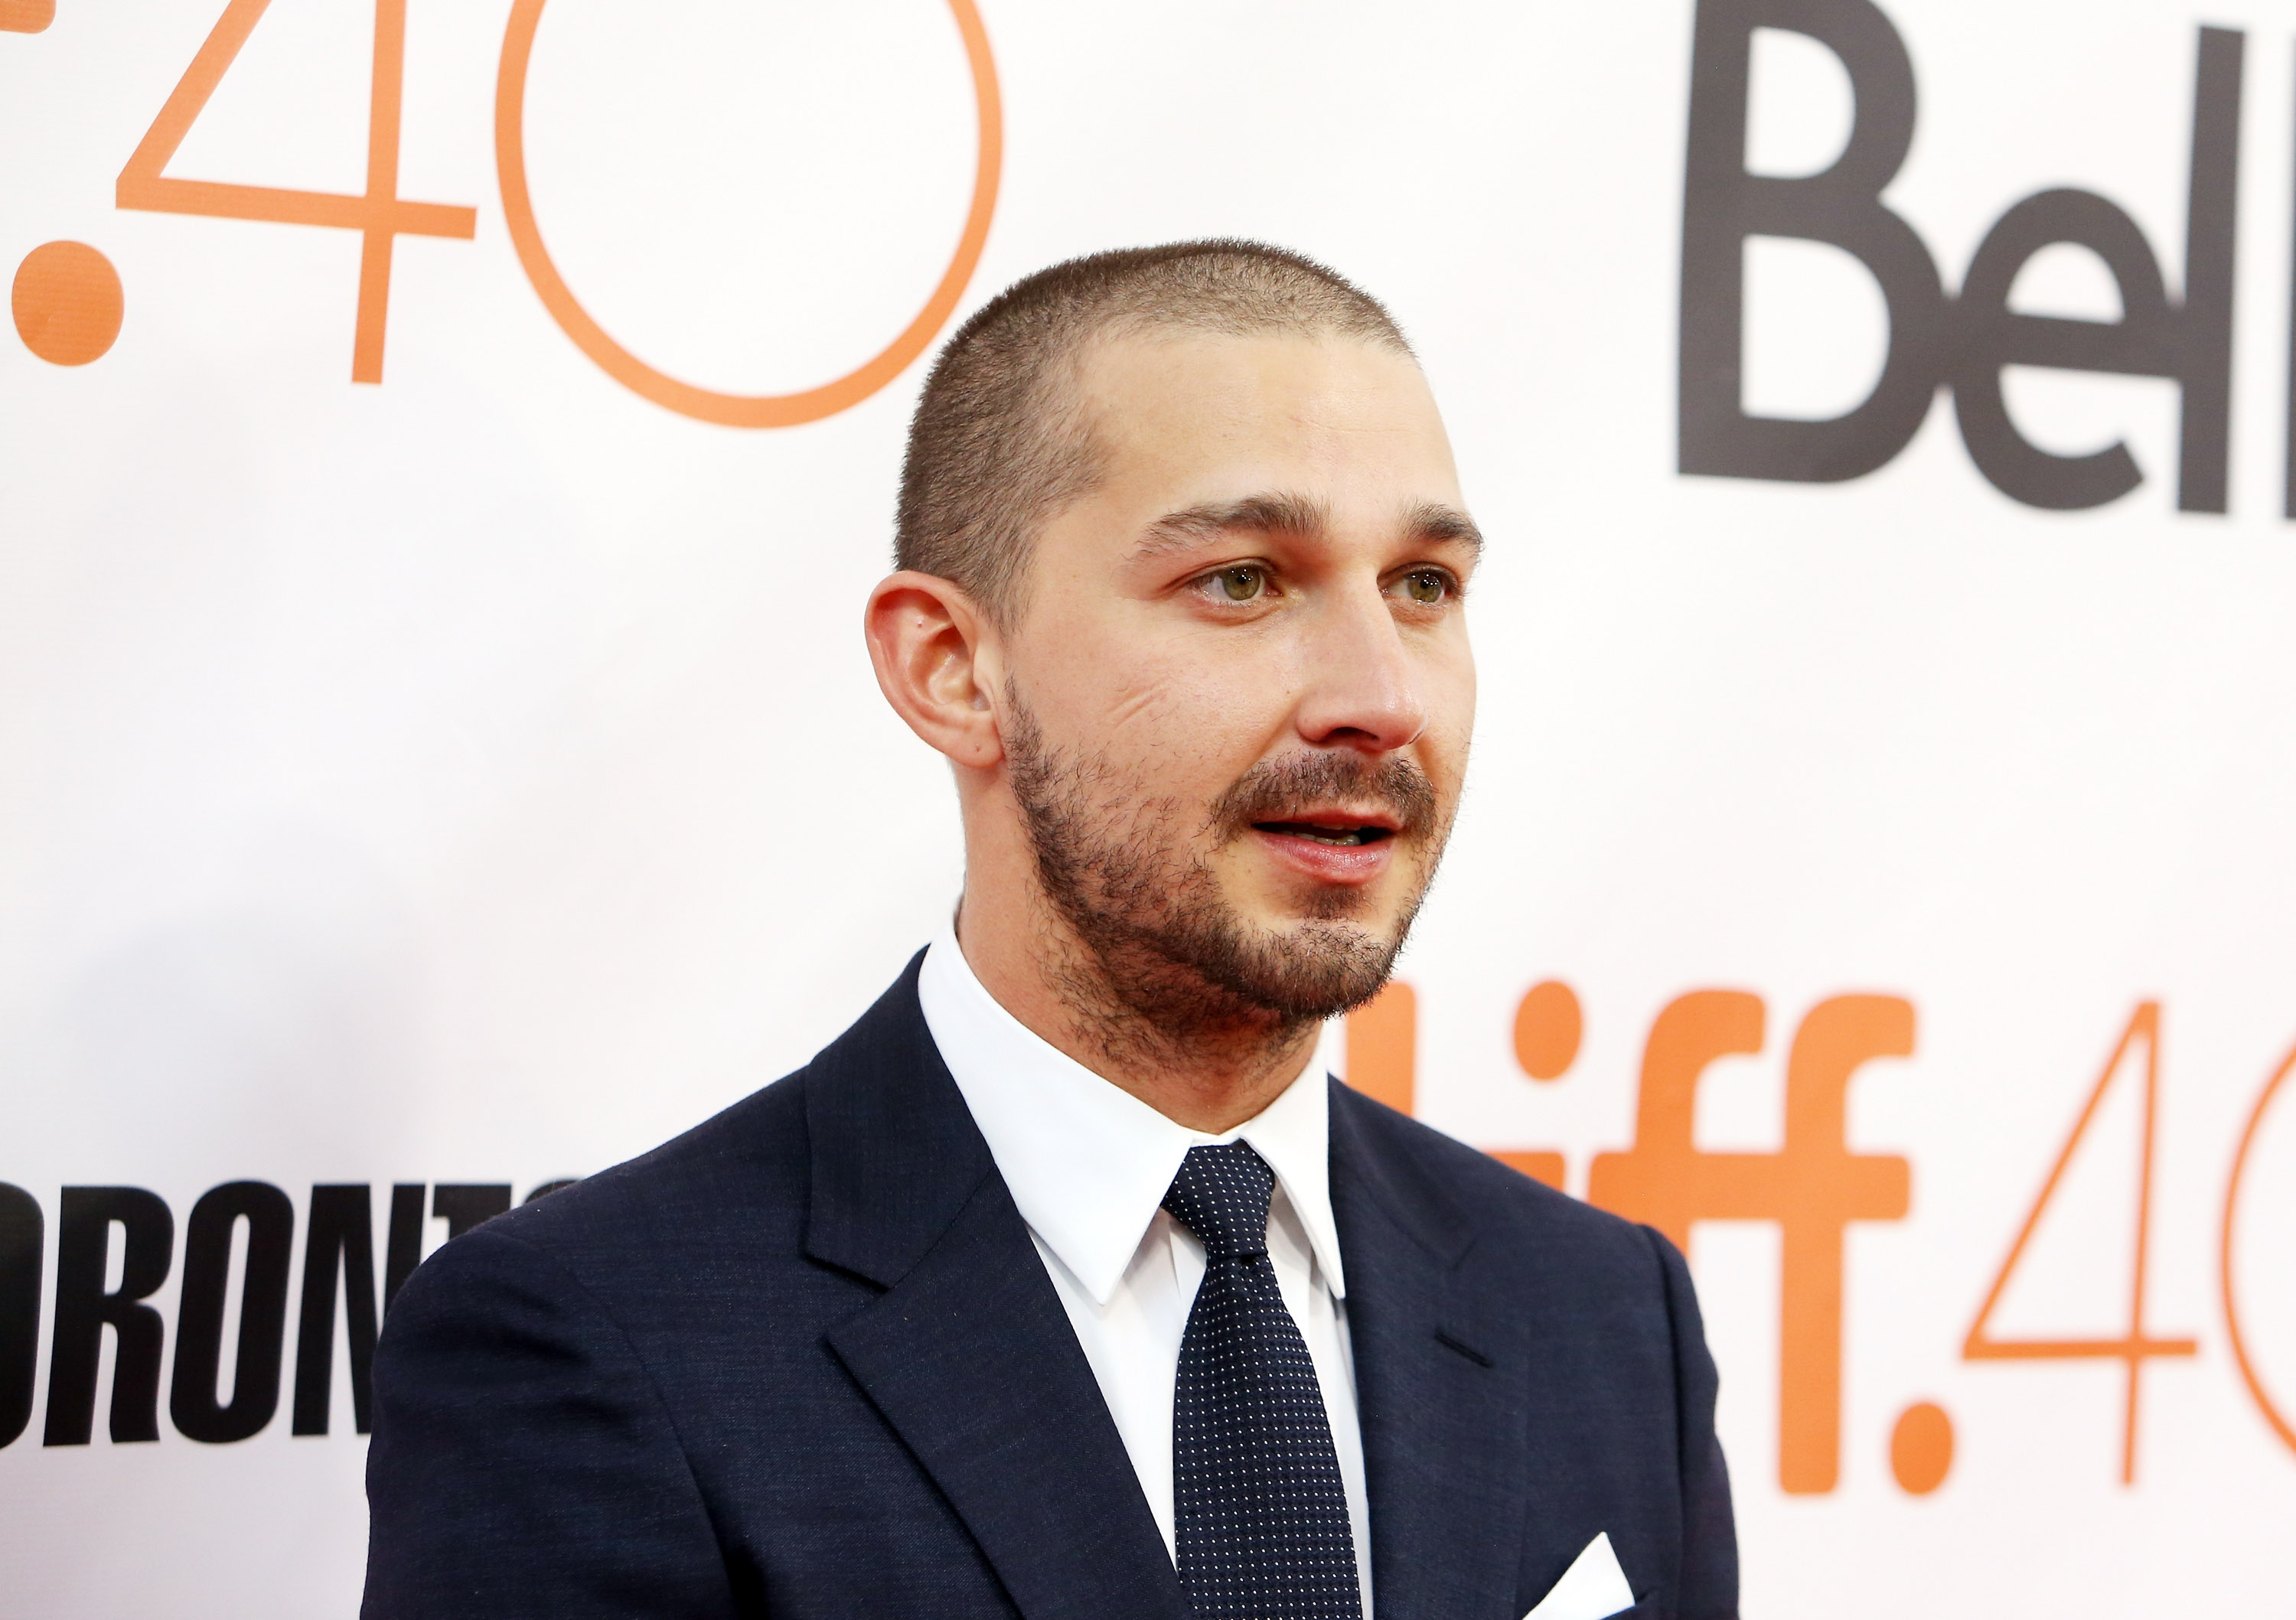 Shia LaBeouf arrives at the 